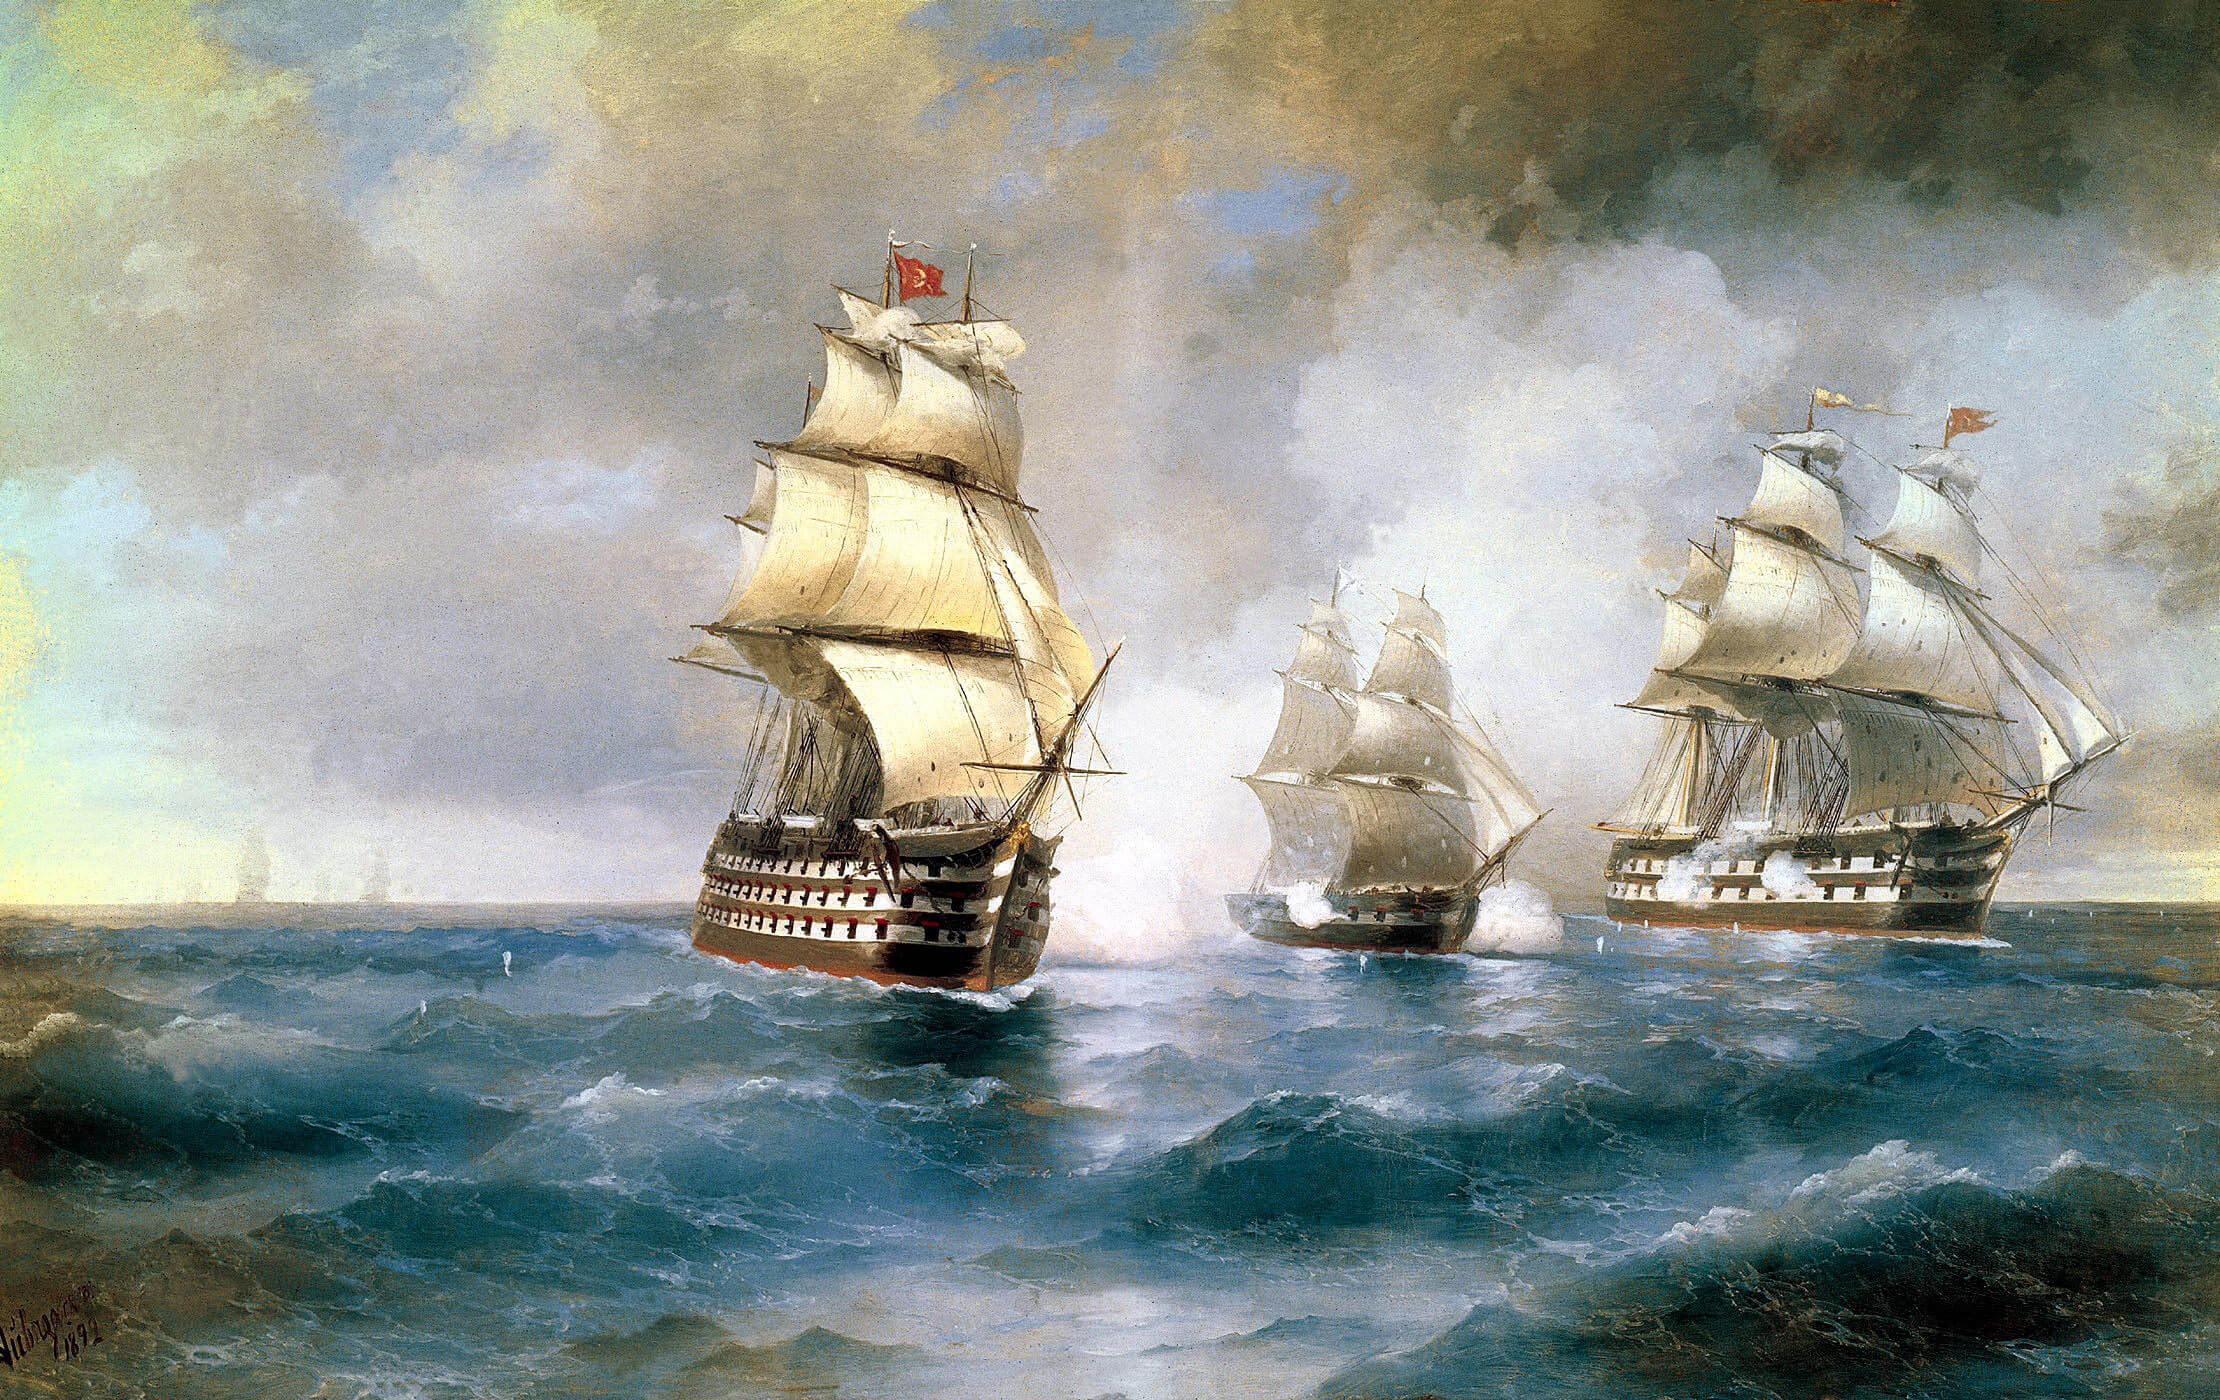 Picture Ivan Aivazovsky - Brig "Mercury", attacked by two Turkish ships 2